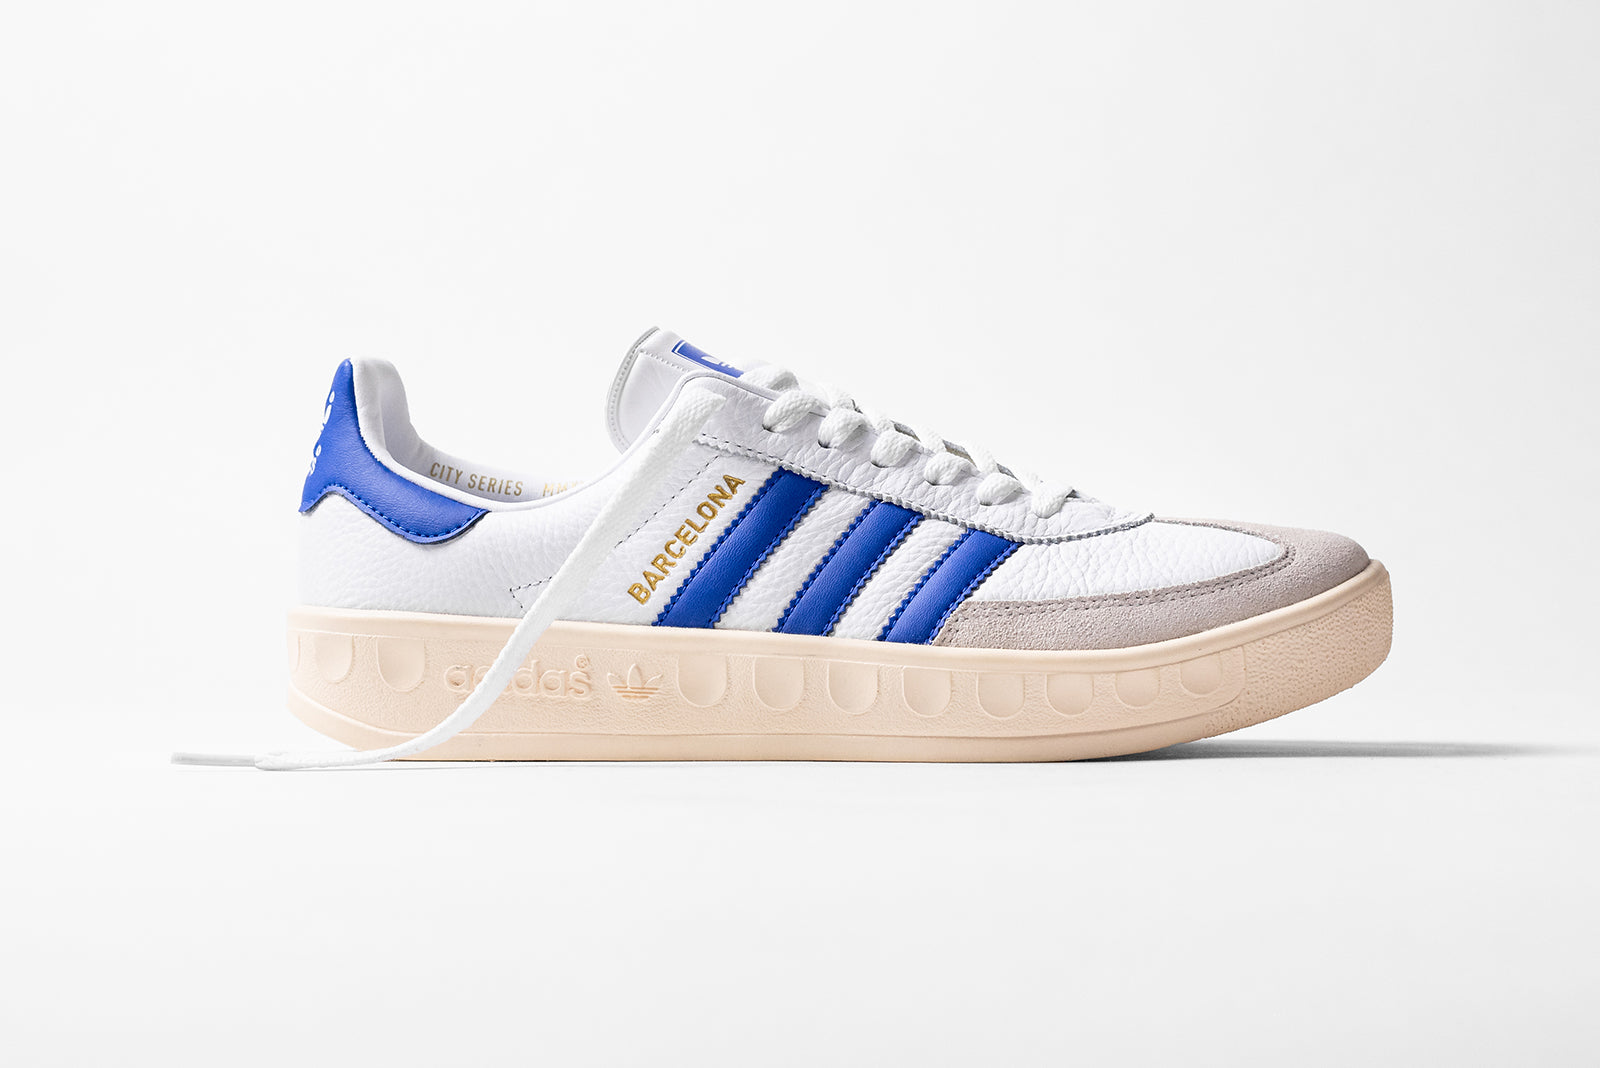 adidas city series shoes